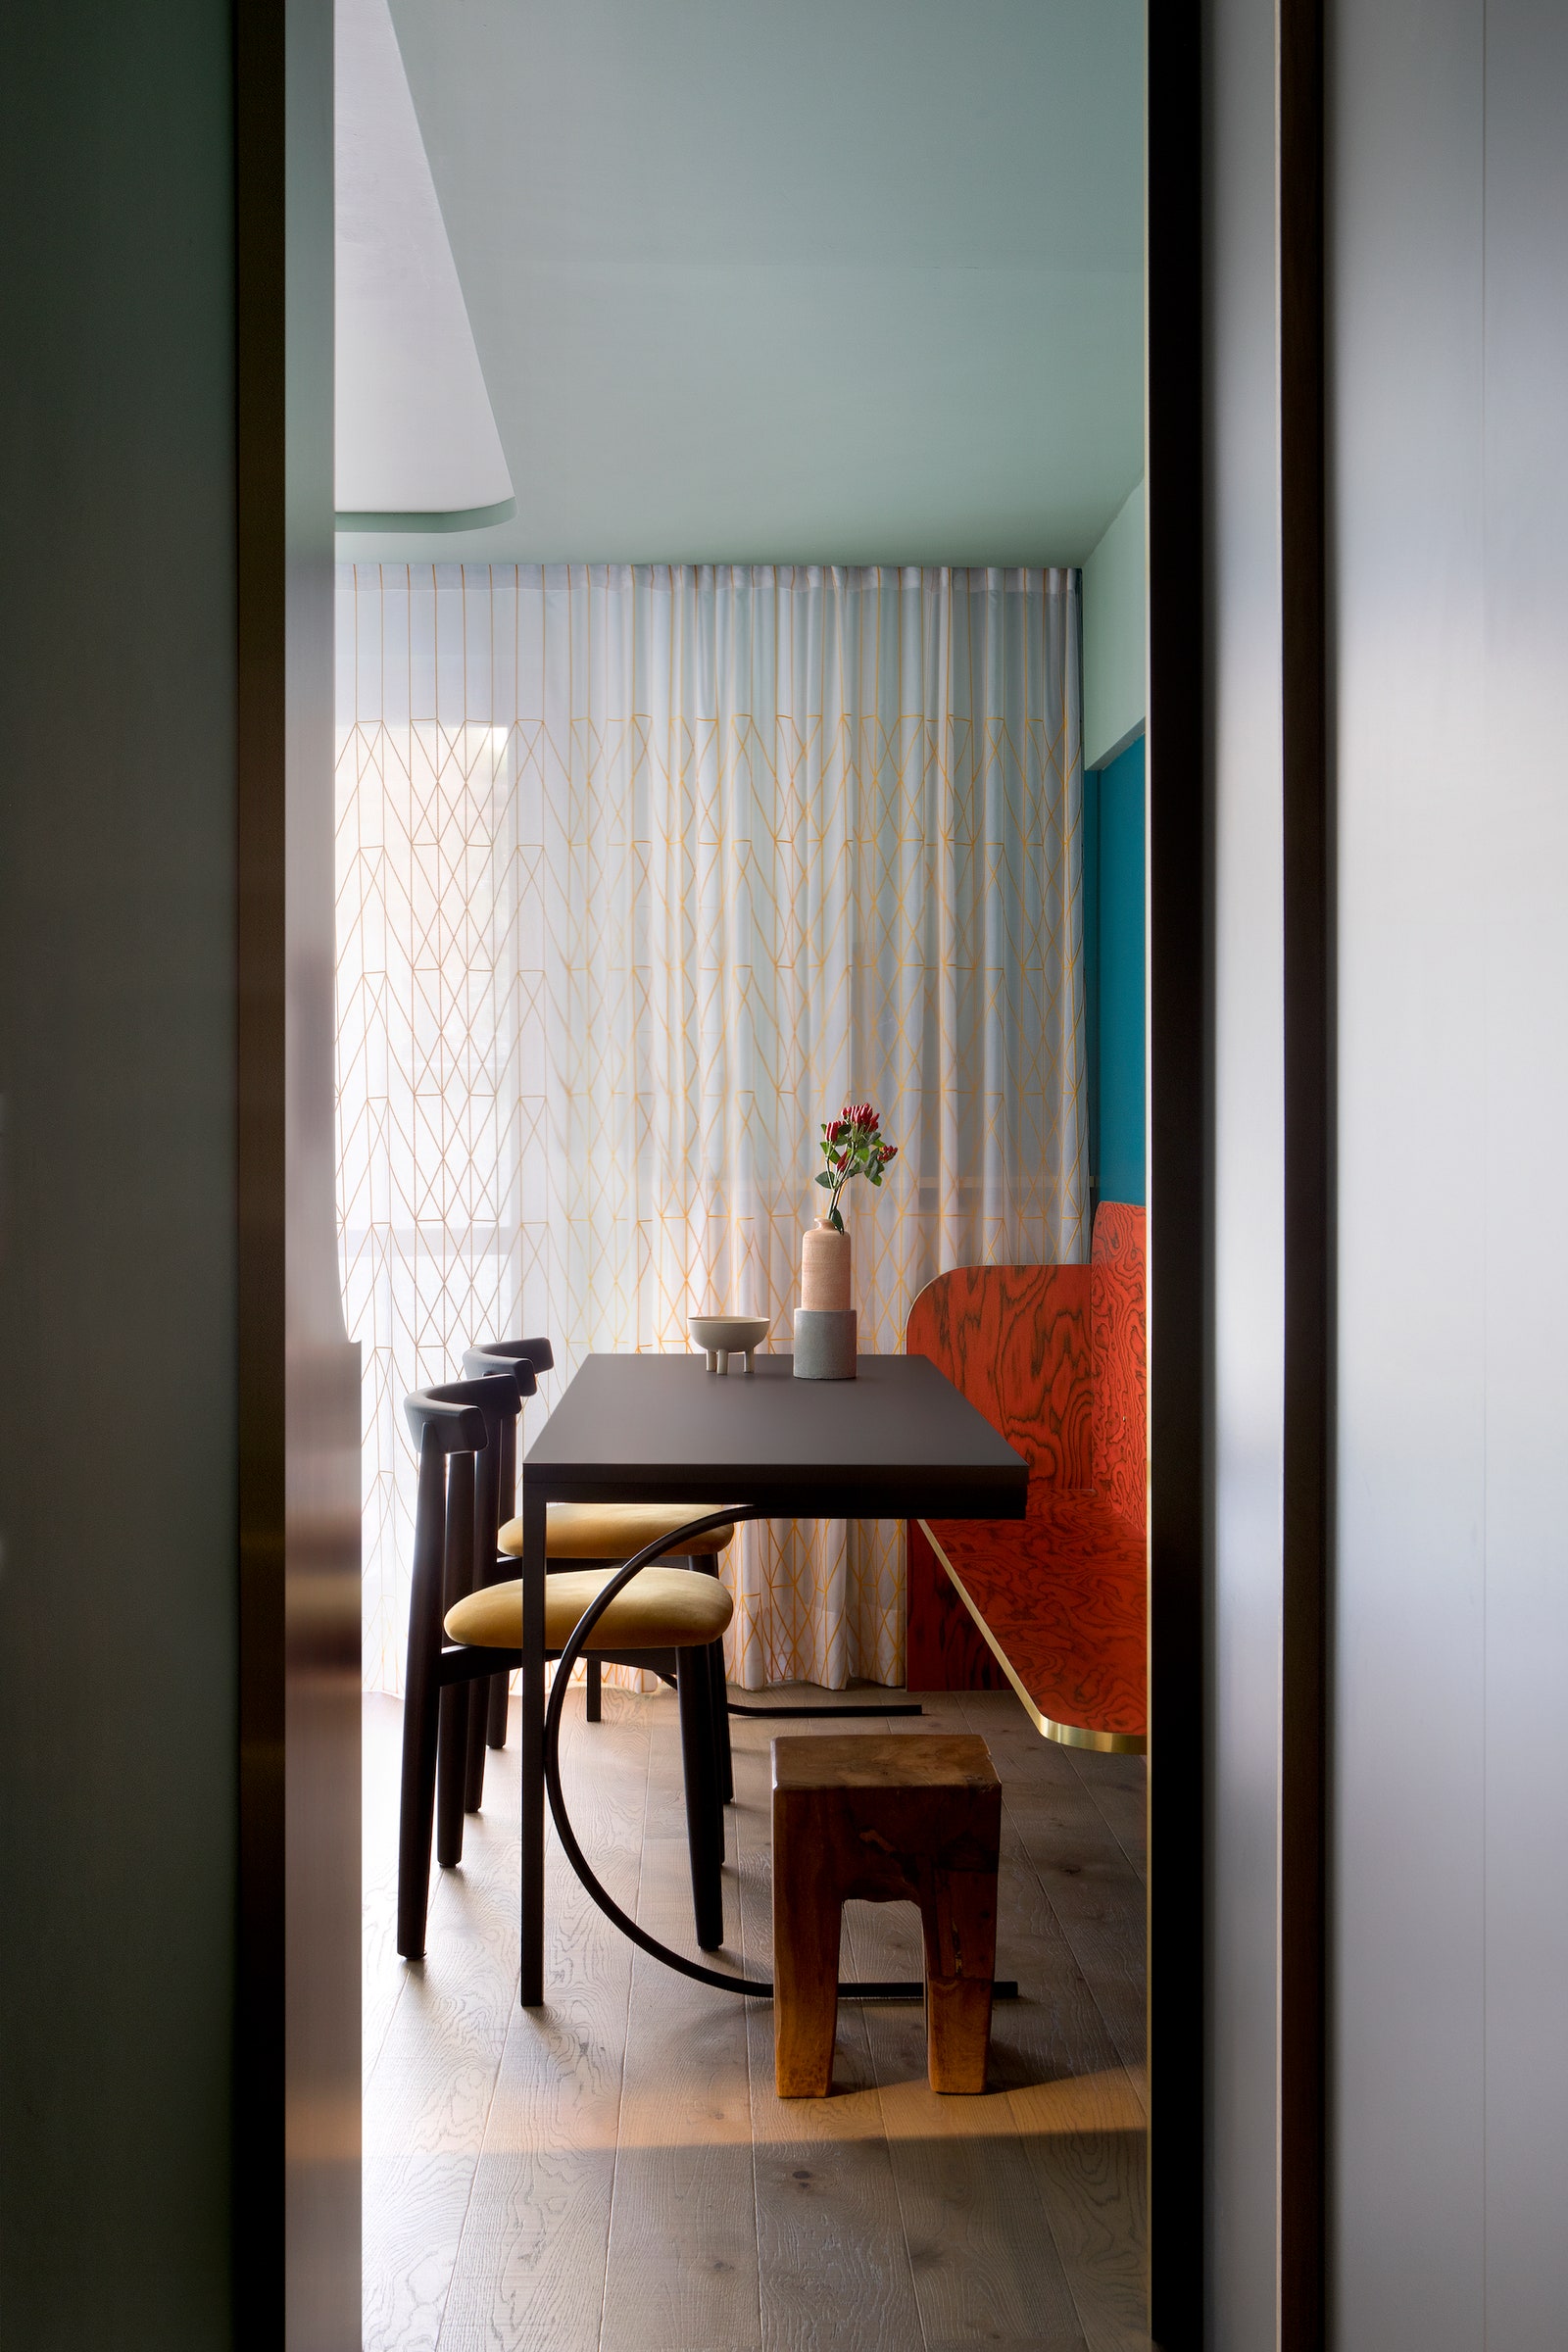 The two Claretta chairs are by Miniforms and the Chainette curtains are by Ronan and Erwan Bouroullec for Kvadrat.